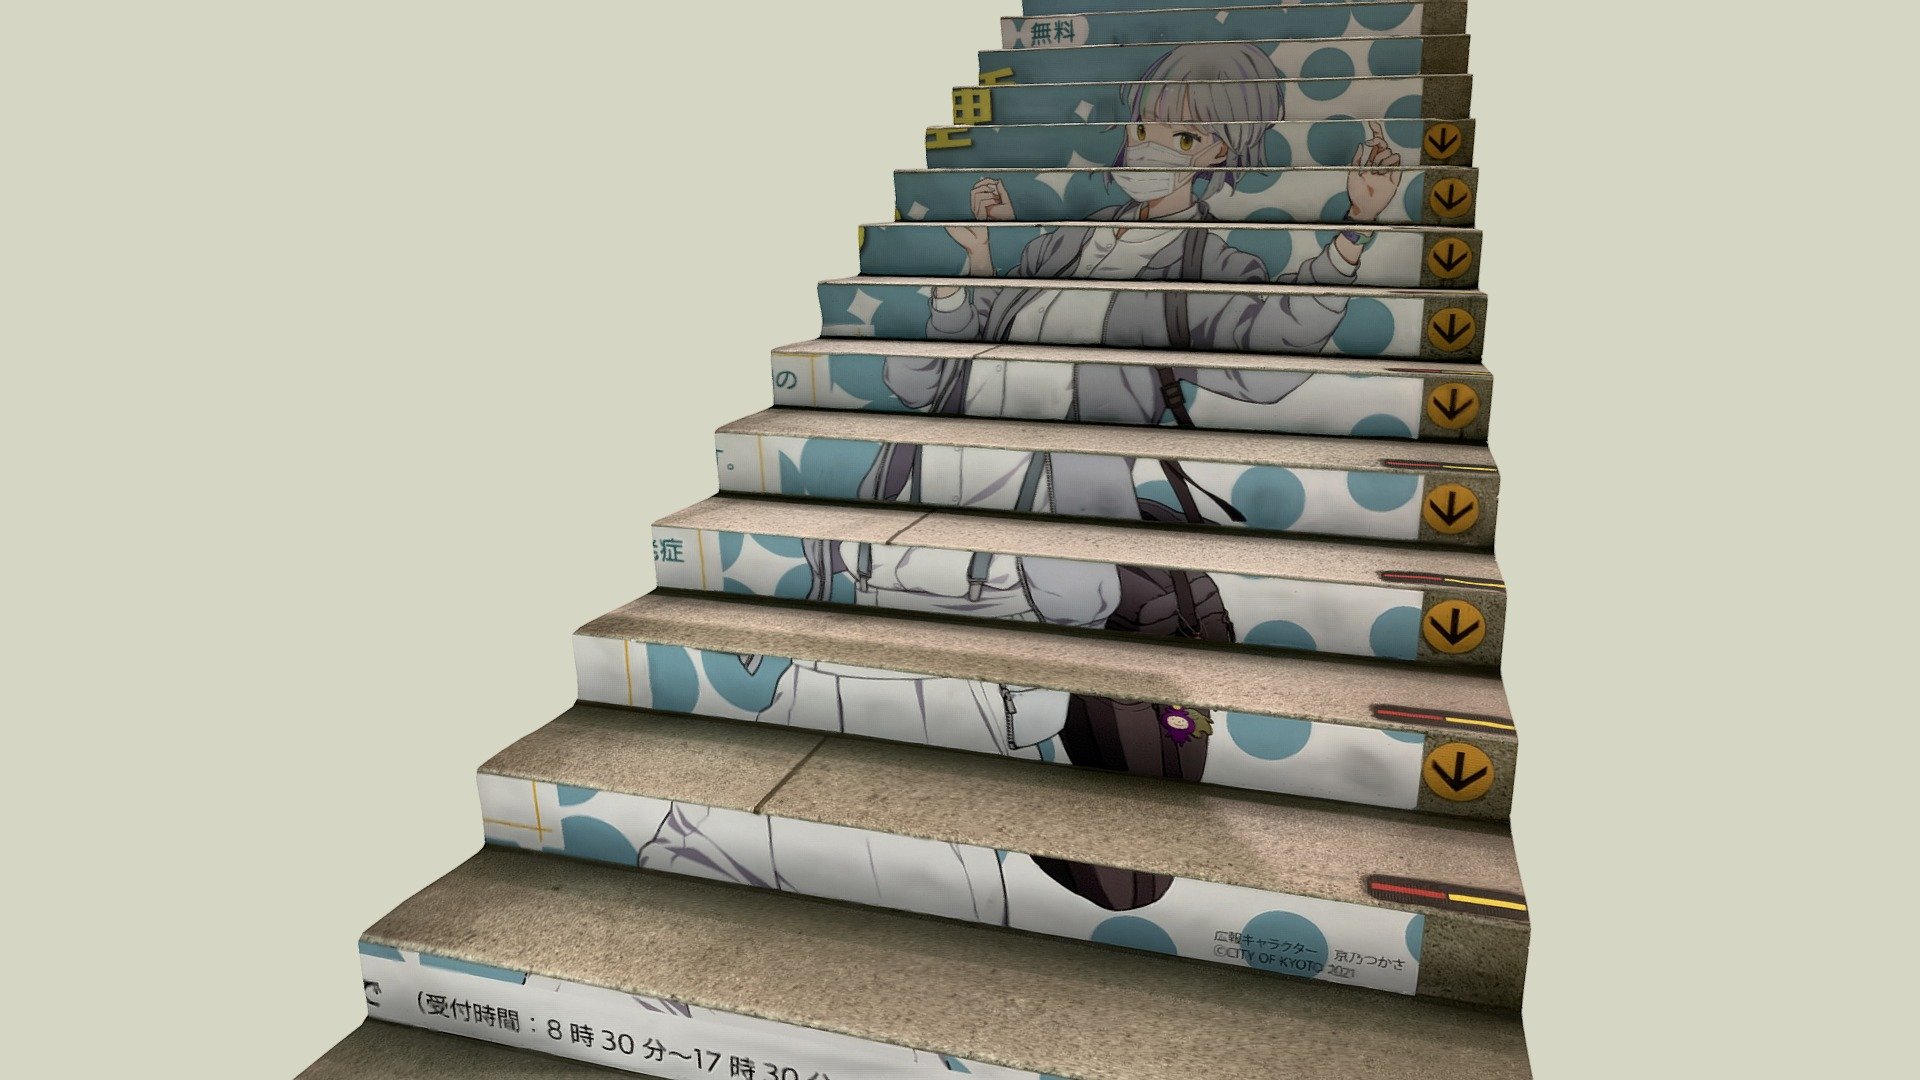 This stairs from the subway platform to the entrance of Kyoto train Station are usually decorated with advertisement but this time it is Kyoto City Goverment's campaign for Corona Vaccination. Made with IphoneXs and Metashape! - Vaccine stairs in Kyoto subway station - 3D model by Koto3D Stephane Vogley (@sayavog) 3d model